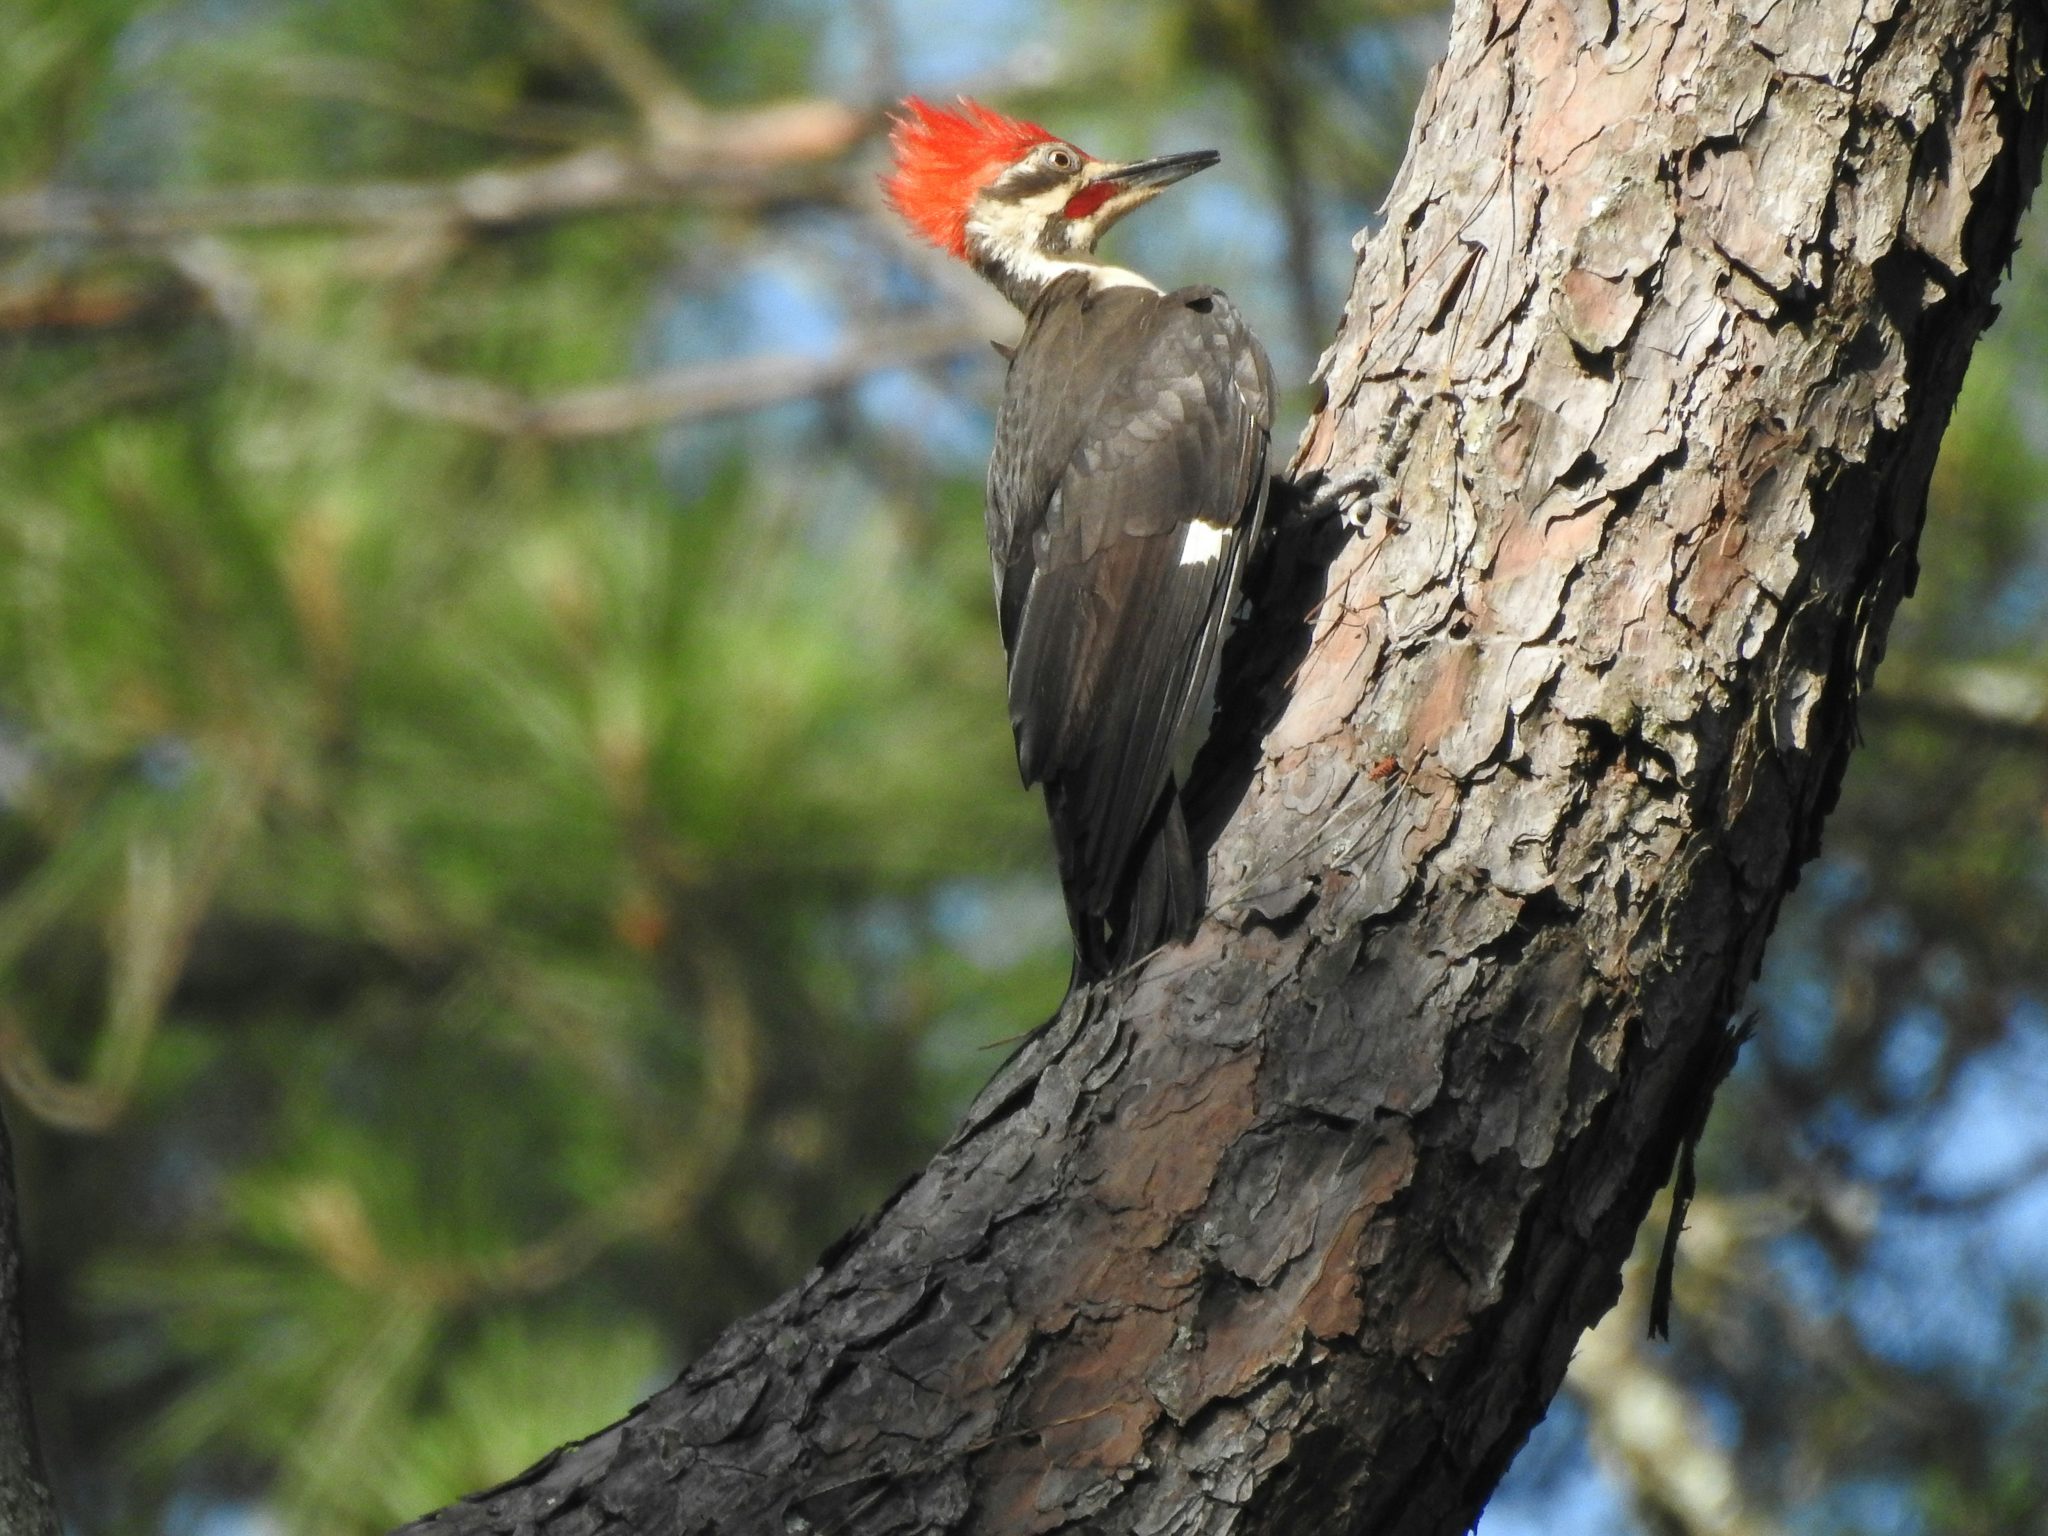 A very large black woodpecker with a white face, large red crest and red "moustache" of feathers near its bill rests on a large branch of a pine tree